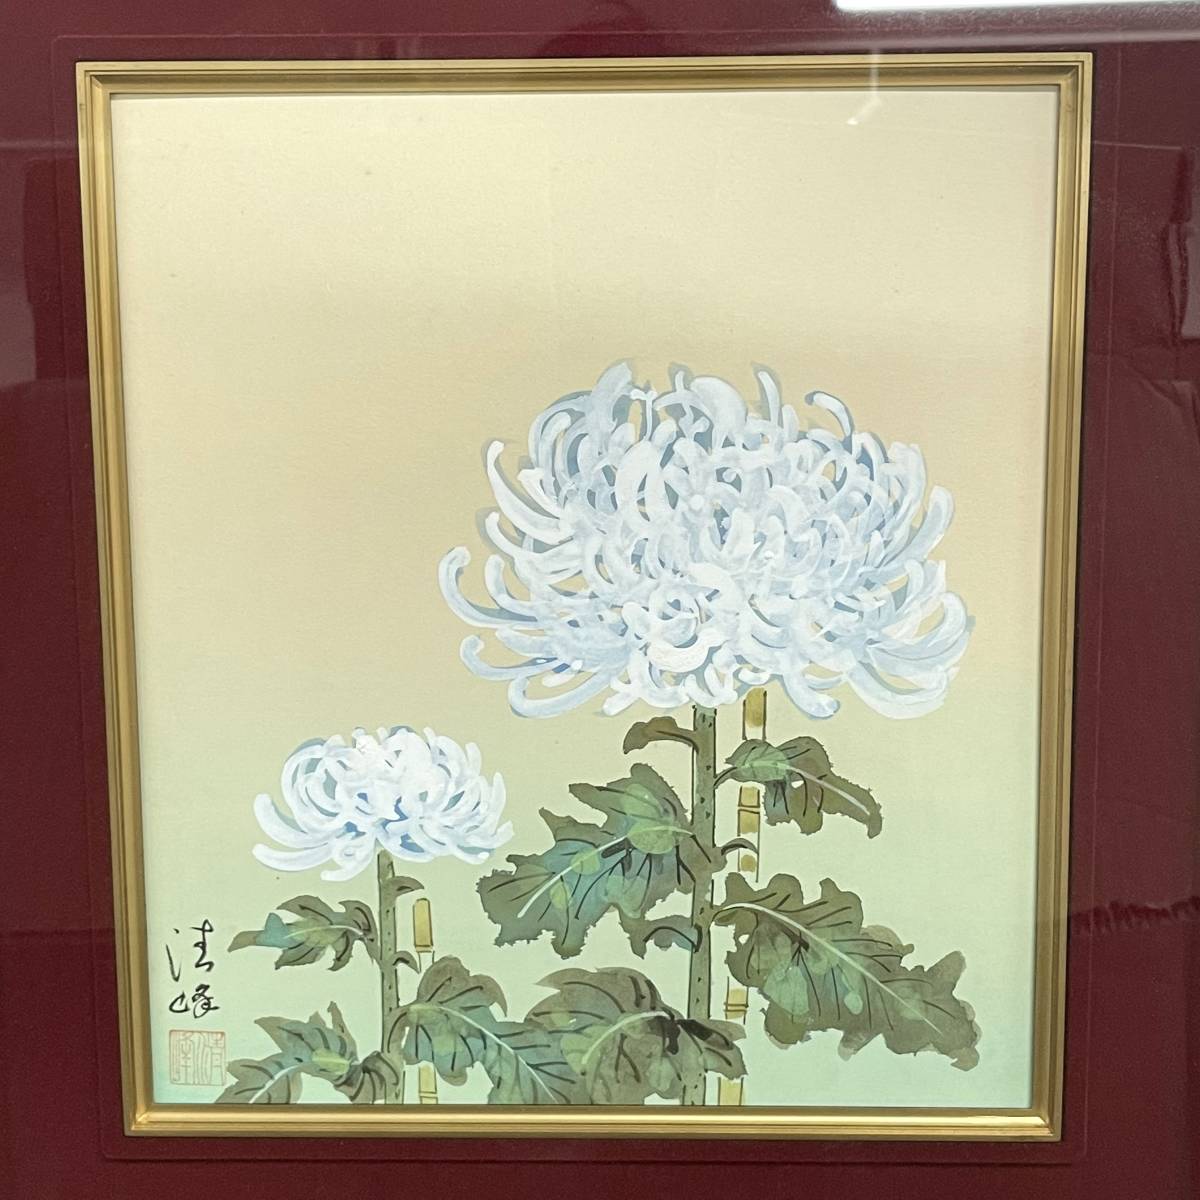 *. shop sale! *1 jpy outright sales! * including in a package shipping possibility * square fancy cardboard * pine rice field Kiyoshi .* amount entering *.. flower * Kyoto fine art industrial arts university * piece exhibition *40.5×38